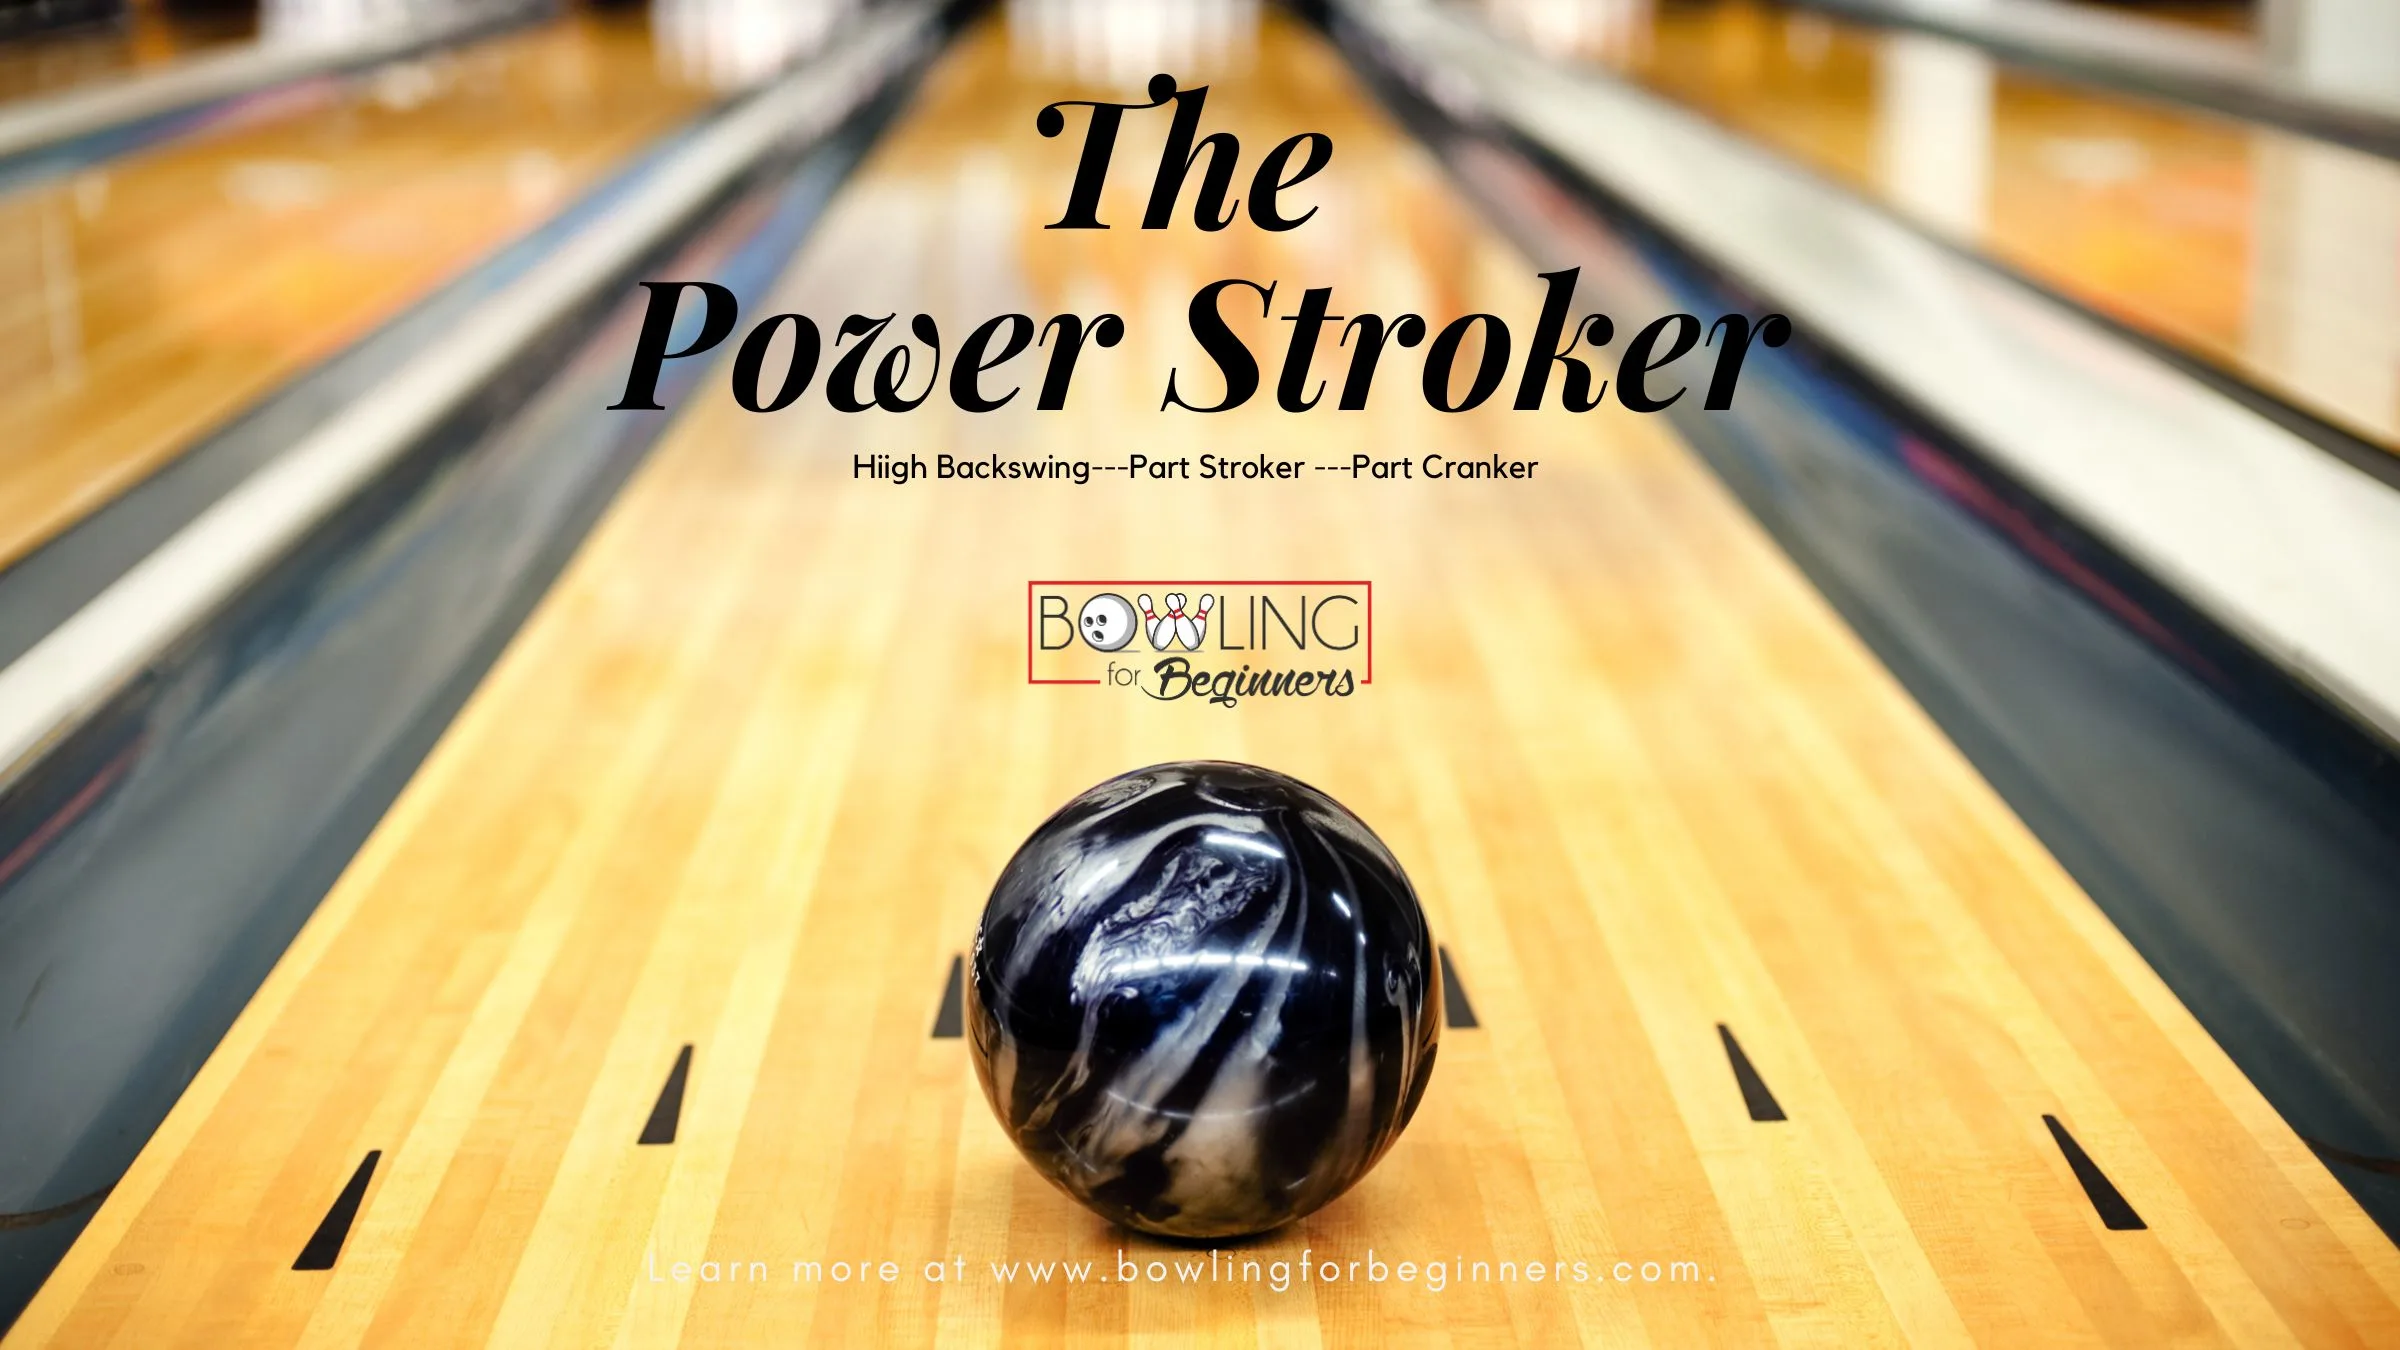 The power stroker bowlers putting spin on the bowling ball is natural